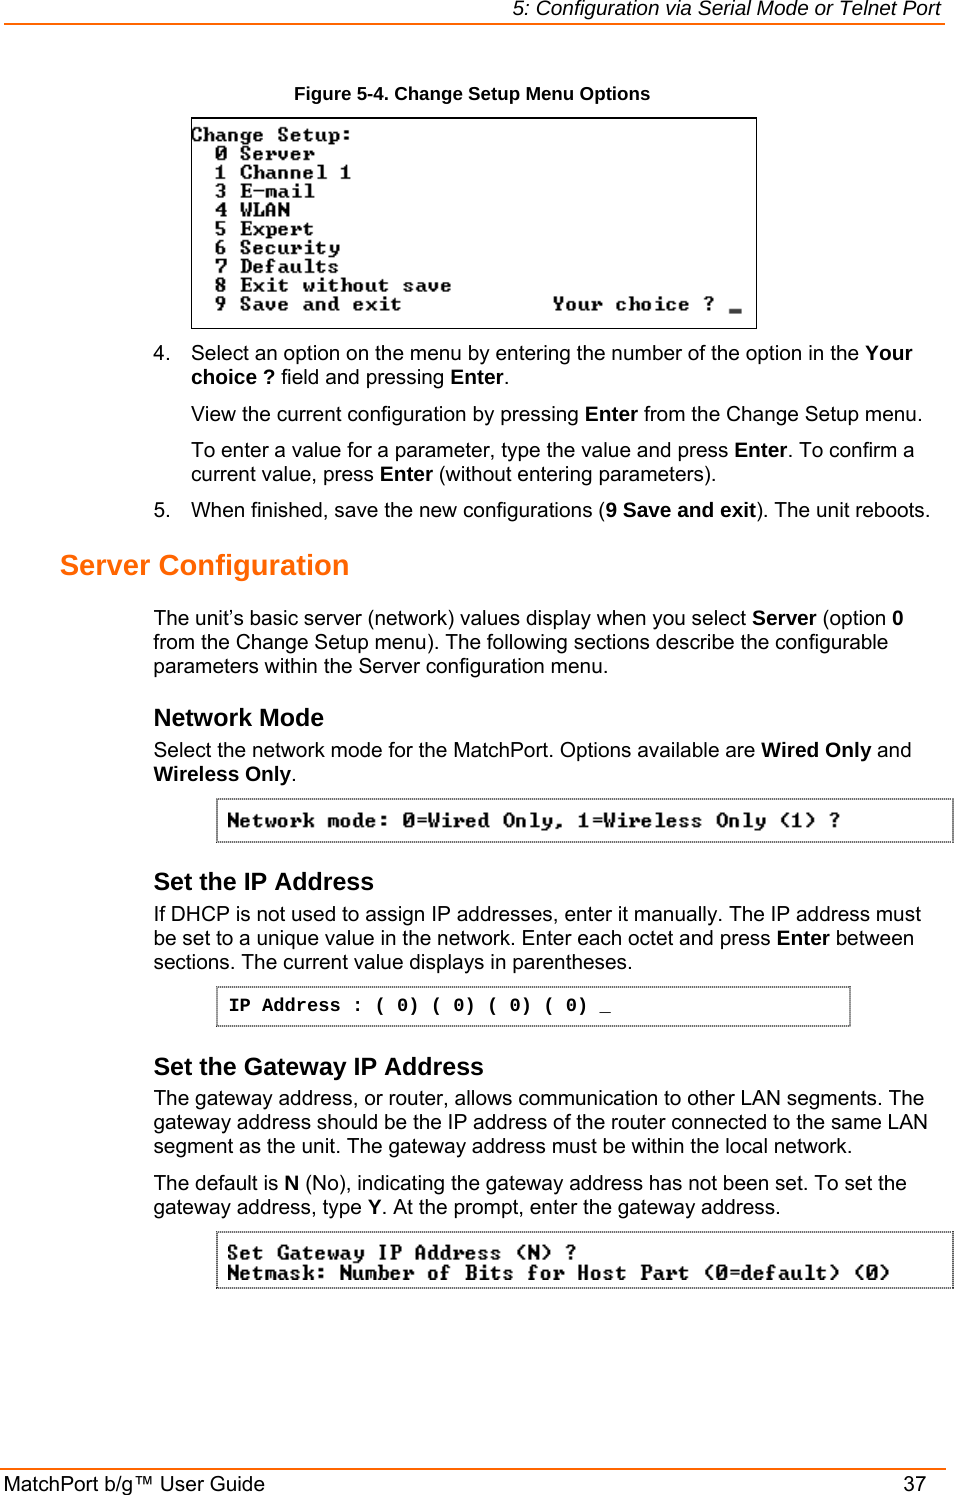 5: Configuration via Serial Mode or Telnet Port MatchPort b/g™ User Guide    37 Figure 5-4. Change Setup Menu Options  4.  Select an option on the menu by entering the number of the option in the Your choice ? field and pressing Enter.   View the current configuration by pressing Enter from the Change Setup menu.   To enter a value for a parameter, type the value and press Enter. To confirm a   current value, press Enter (without entering parameters).  5.  When finished, save the new configurations (9 Save and exit). The unit reboots.  Server Configuration  The unit’s basic server (network) values display when you select Server (option 0 from the Change Setup menu). The following sections describe the configurable parameters within the Server configuration menu. Network Mode Select the network mode for the MatchPort. Options available are Wired Only and Wireless Only.  Set the IP Address  If DHCP is not used to assign IP addresses, enter it manually. The IP address must be set to a unique value in the network. Enter each octet and press Enter between sections. The current value displays in parentheses. IP Address : ( 0) ( 0) ( 0) ( 0) _ Set the Gateway IP Address  The gateway address, or router, allows communication to other LAN segments. The gateway address should be the IP address of the router connected to the same LAN segment as the unit. The gateway address must be within the local network.  The default is N (No), indicating the gateway address has not been set. To set the gateway address, type Y. At the prompt, enter the gateway address.  